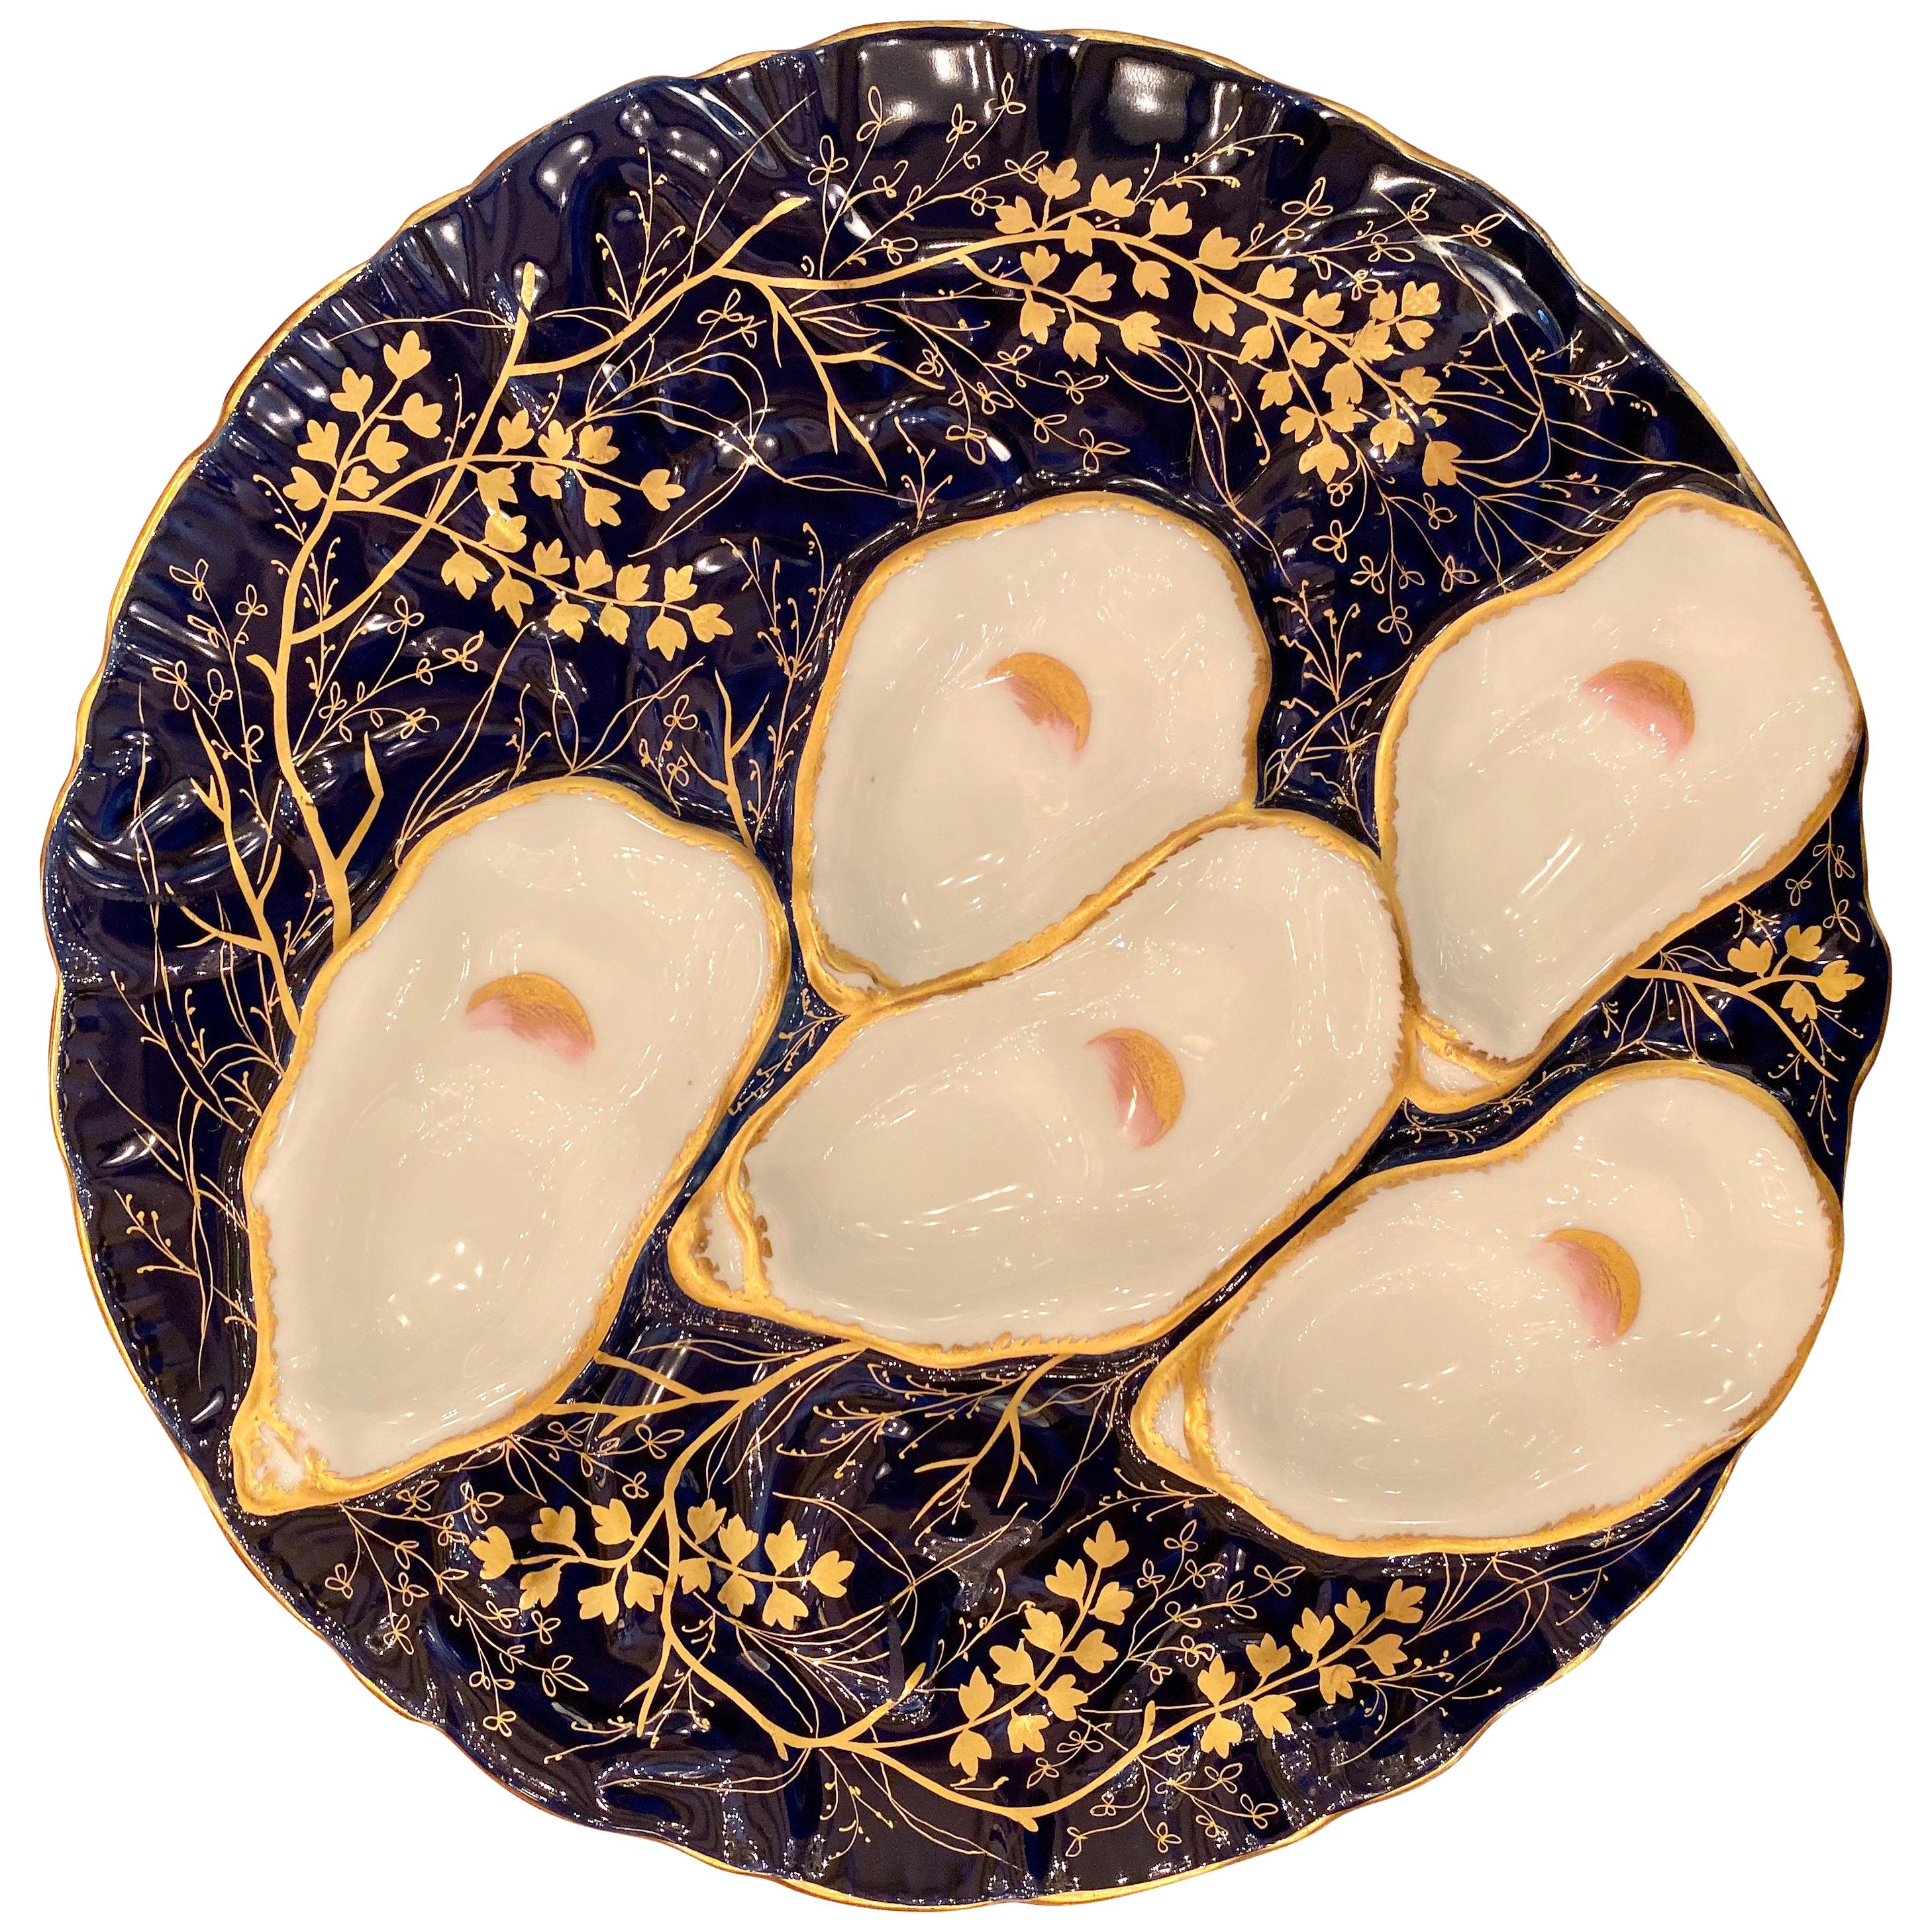 Antique French Limoges Porcelain Turkey Pattern Oyster Plate, circa 1880s